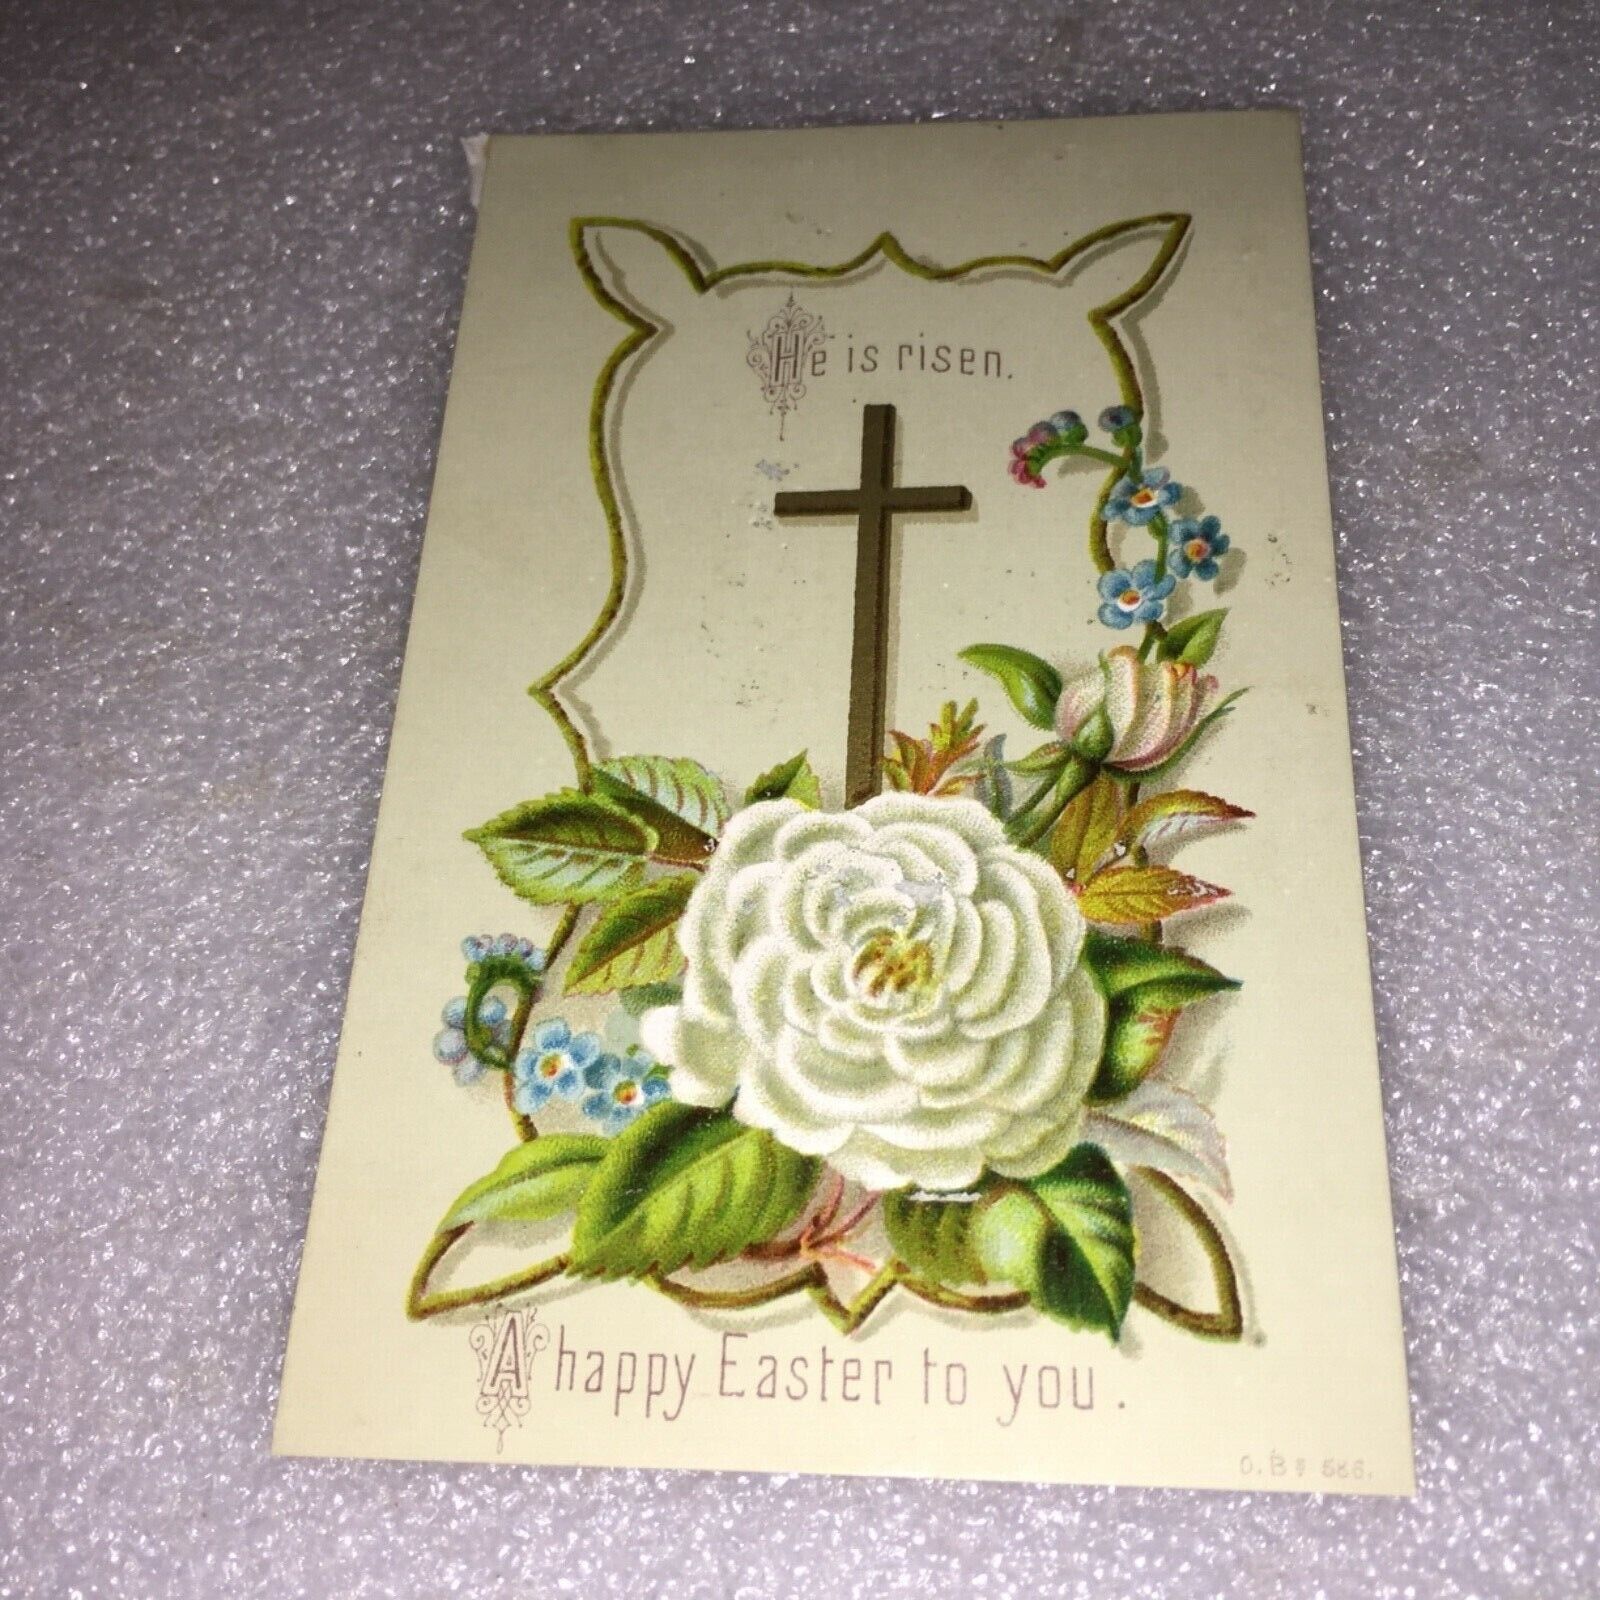 VINTAGE OB HE HAS RISEN. HAPPY EASTER TO YOU CARD